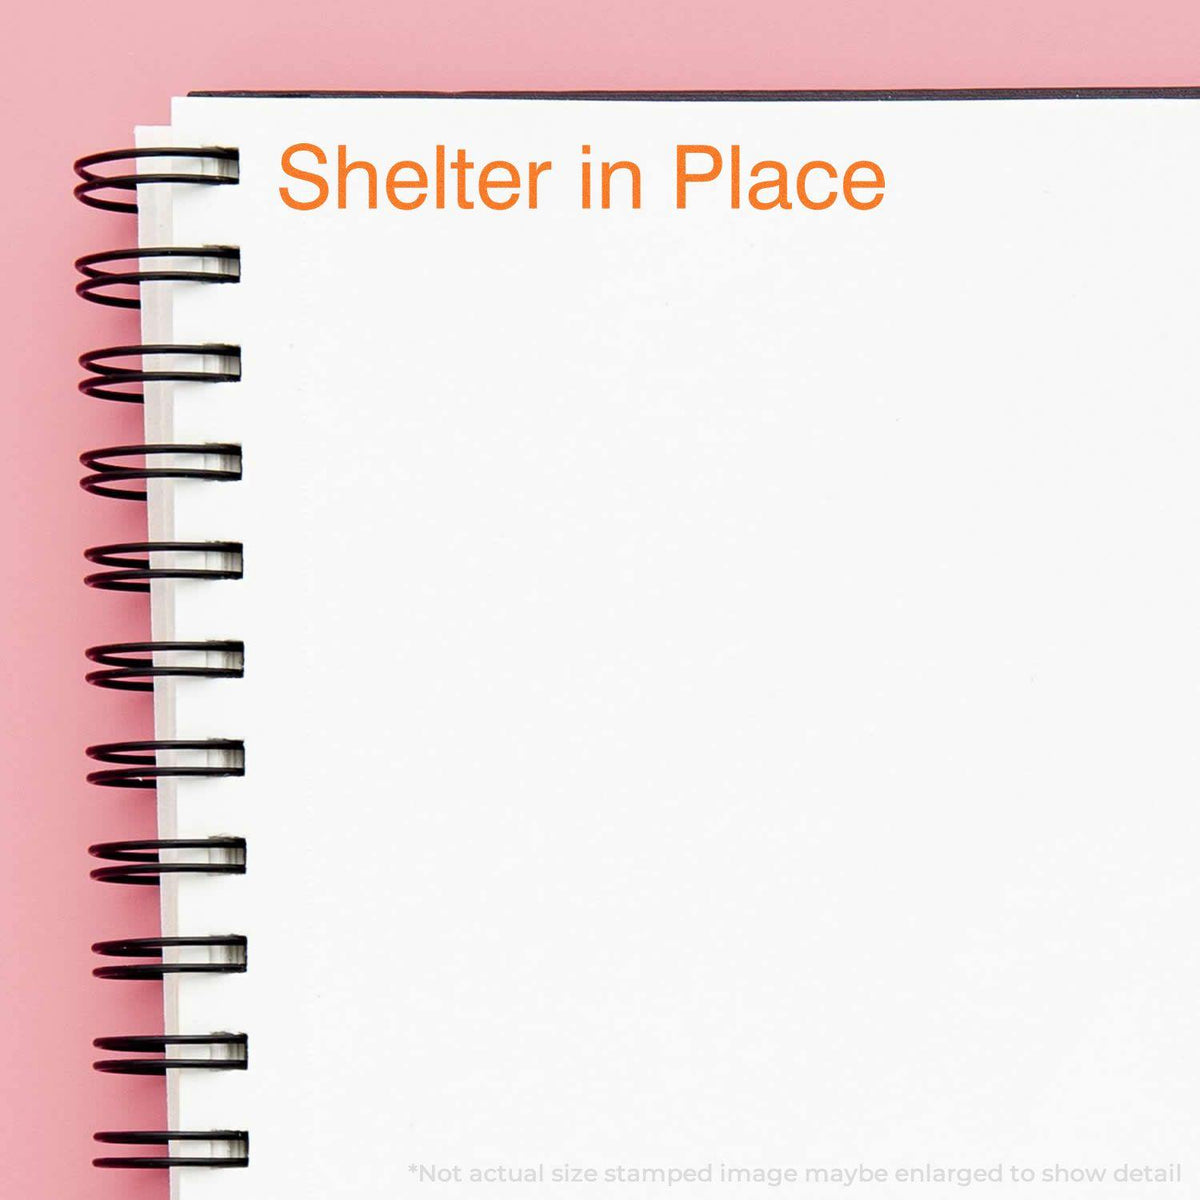 In Use Slim Pre-Inked Shelter in Place Stamp Image